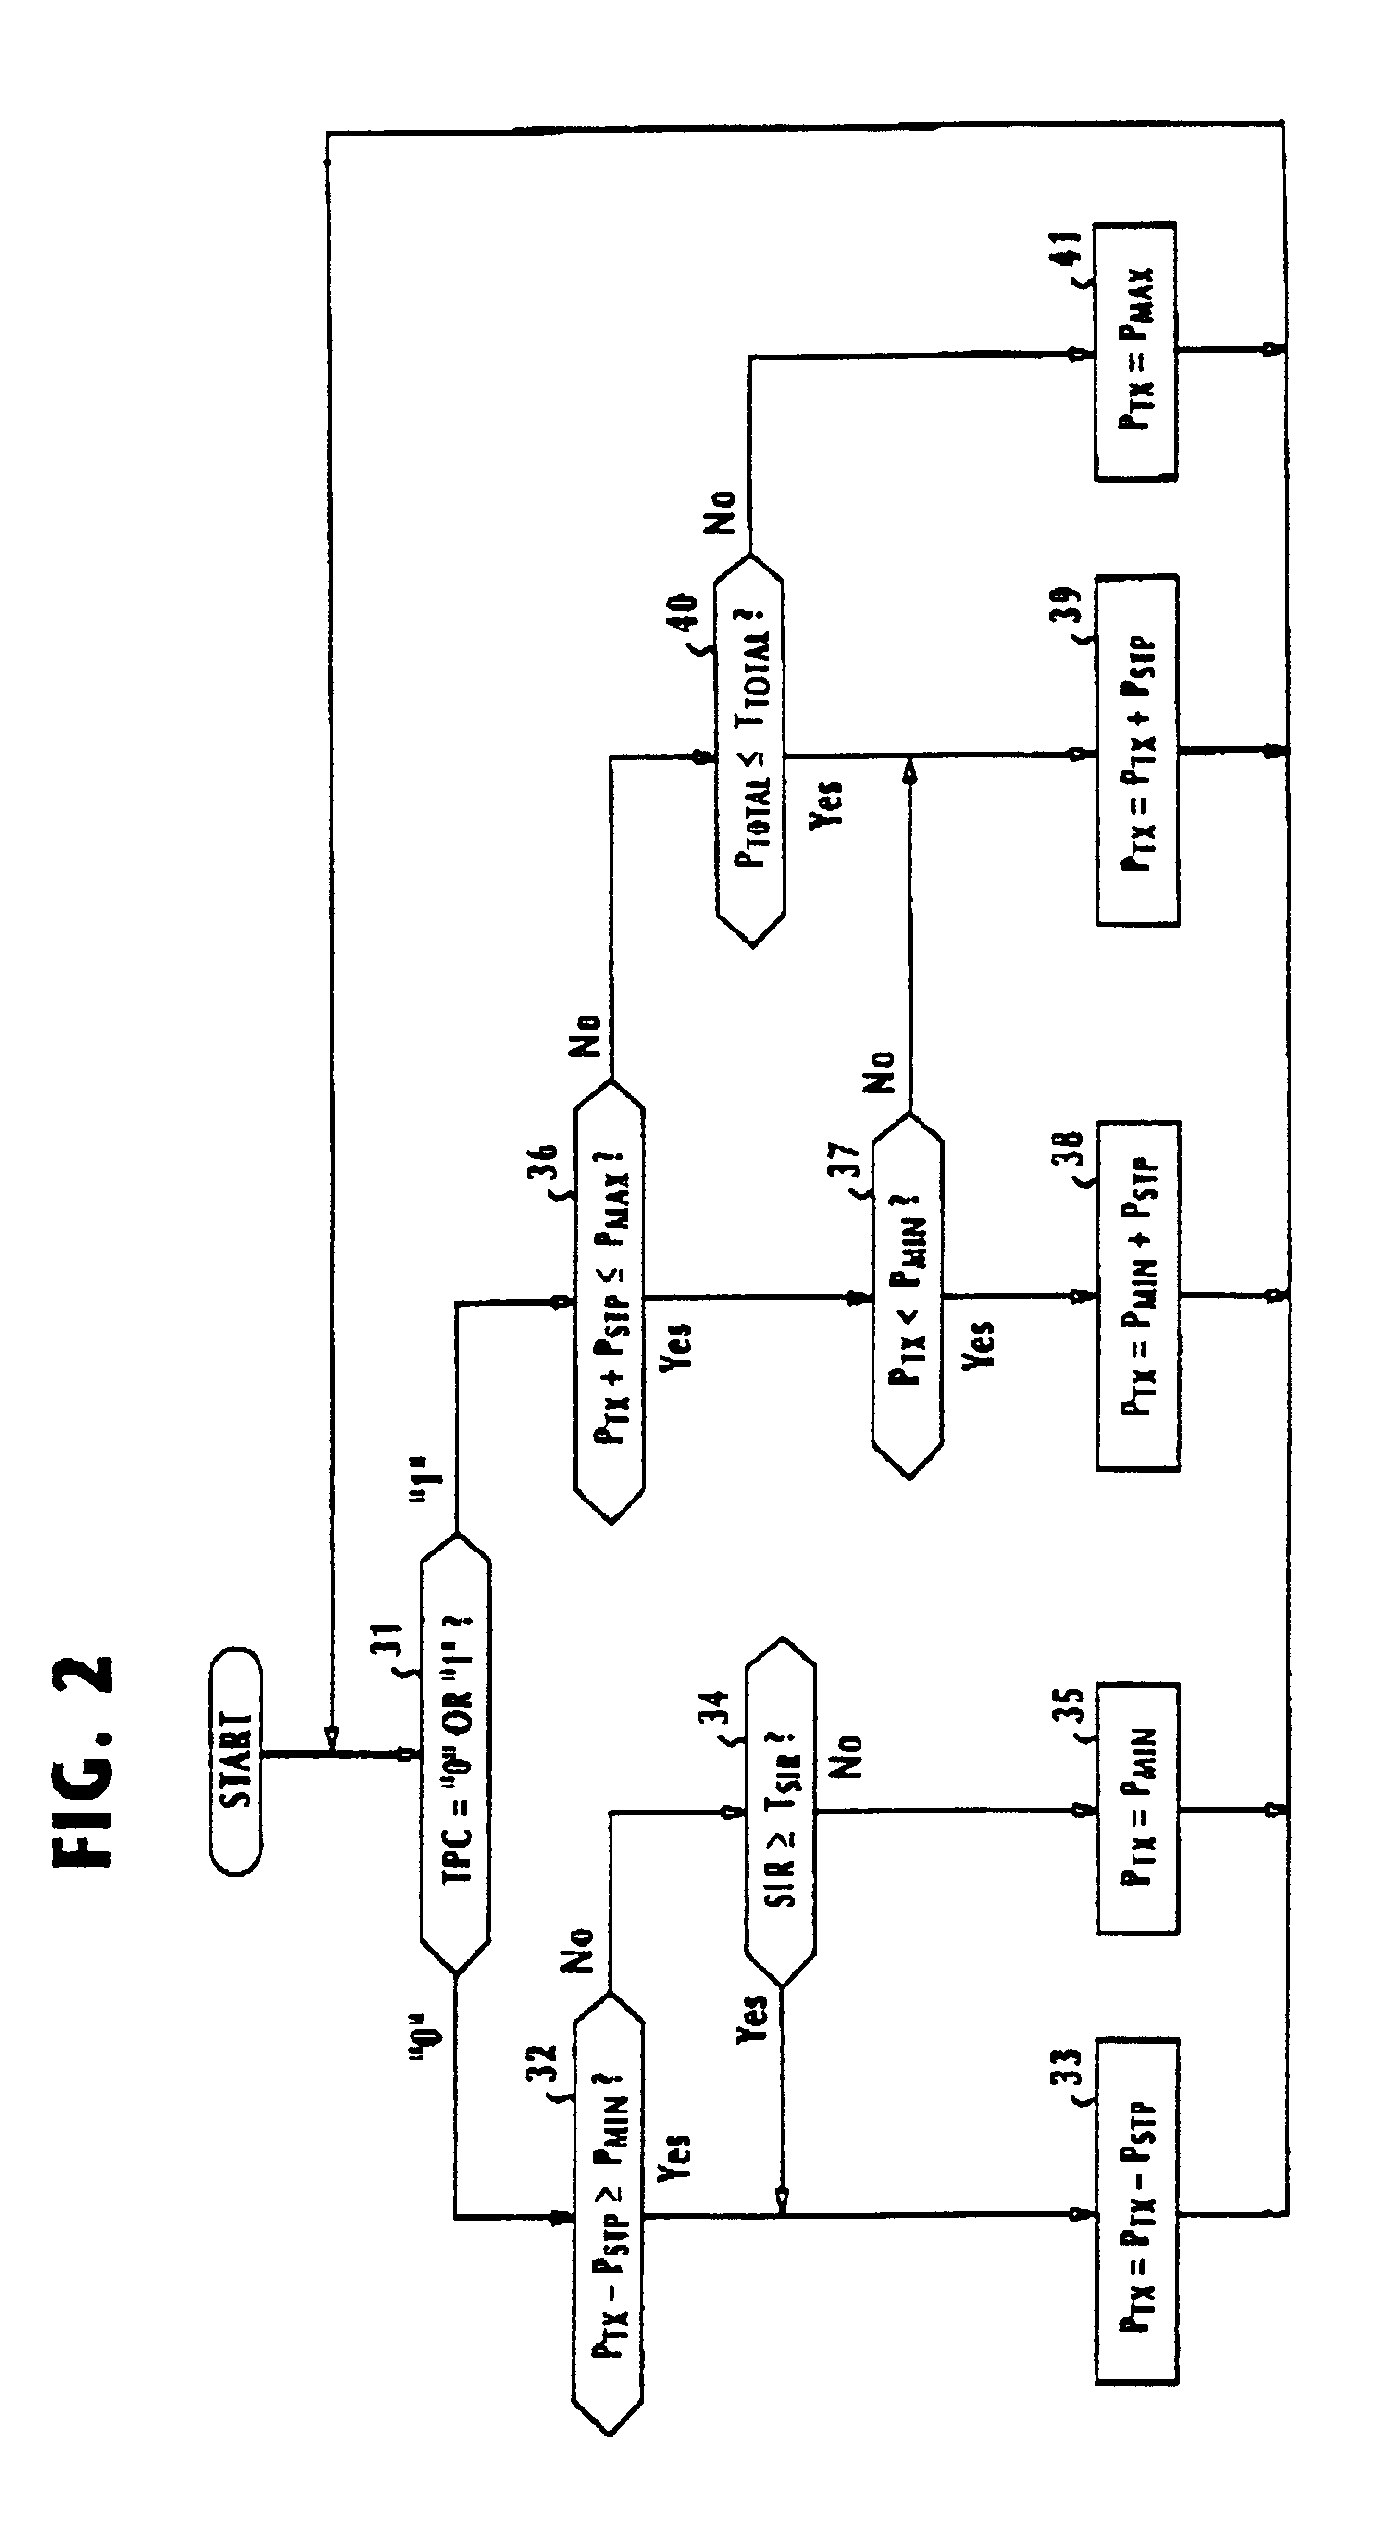 Downlink power control method and CDMA communication system incorporating the control method